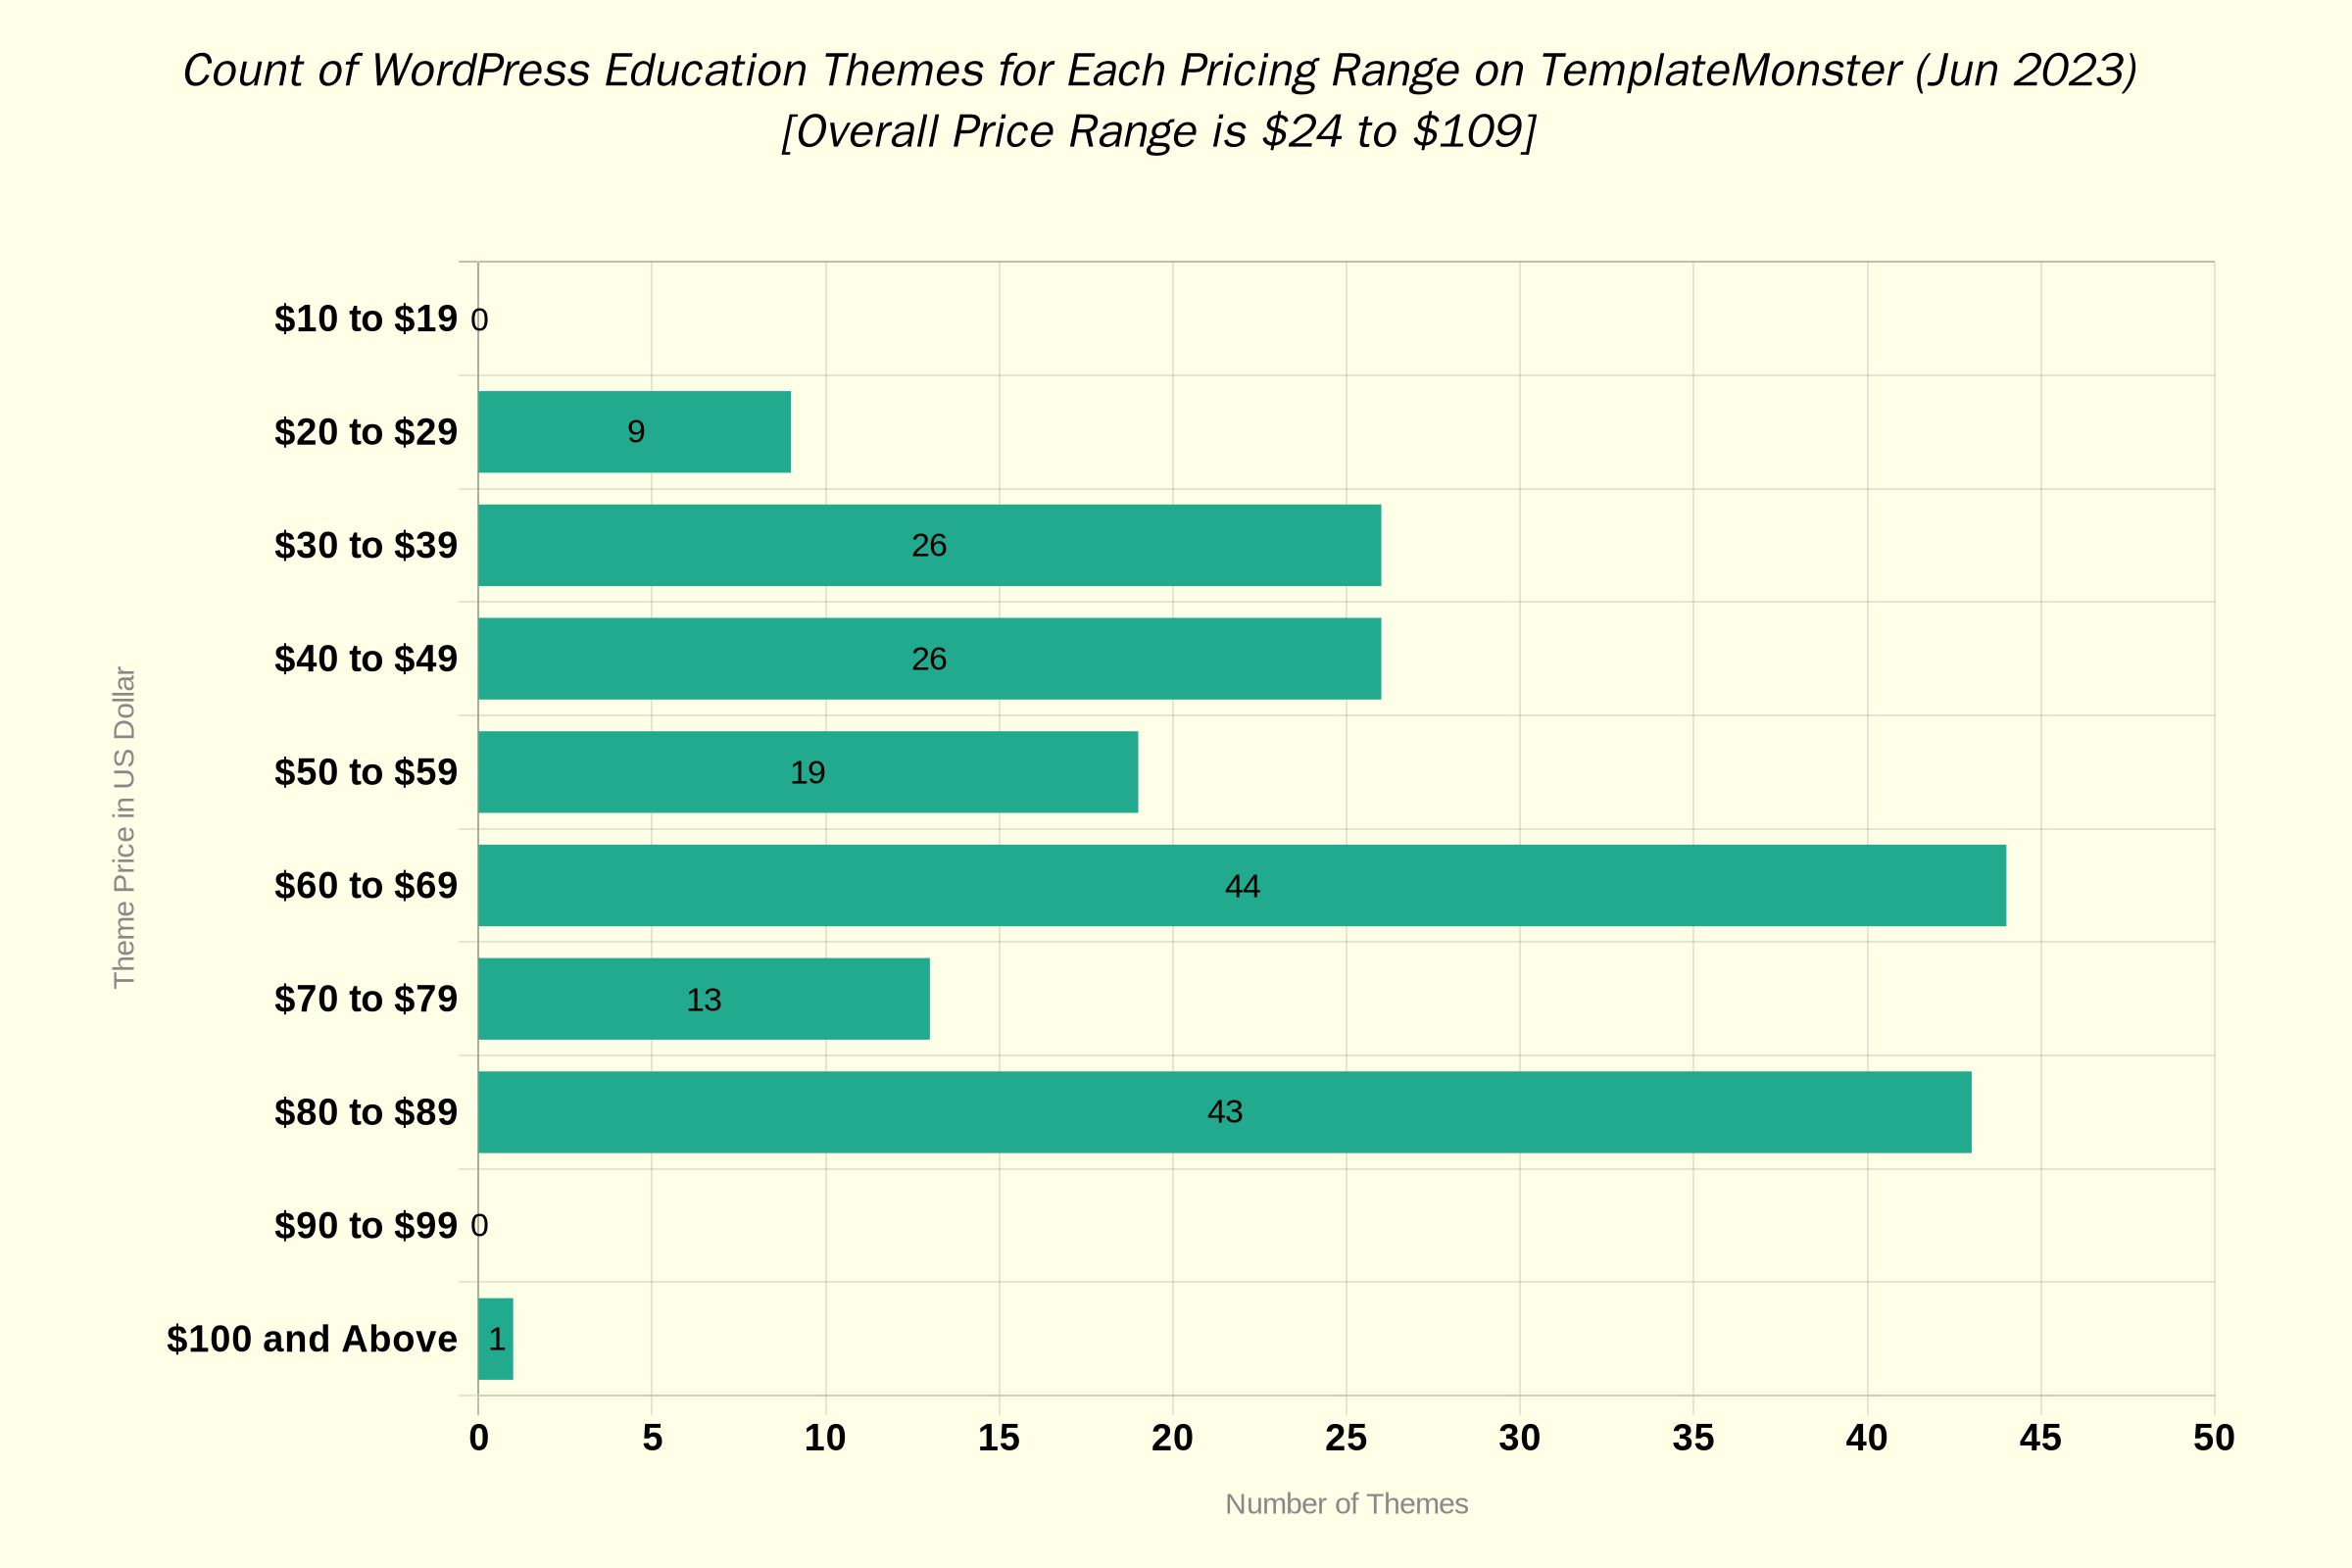 Count of WordPress education themes for each price range on TemplateMonster